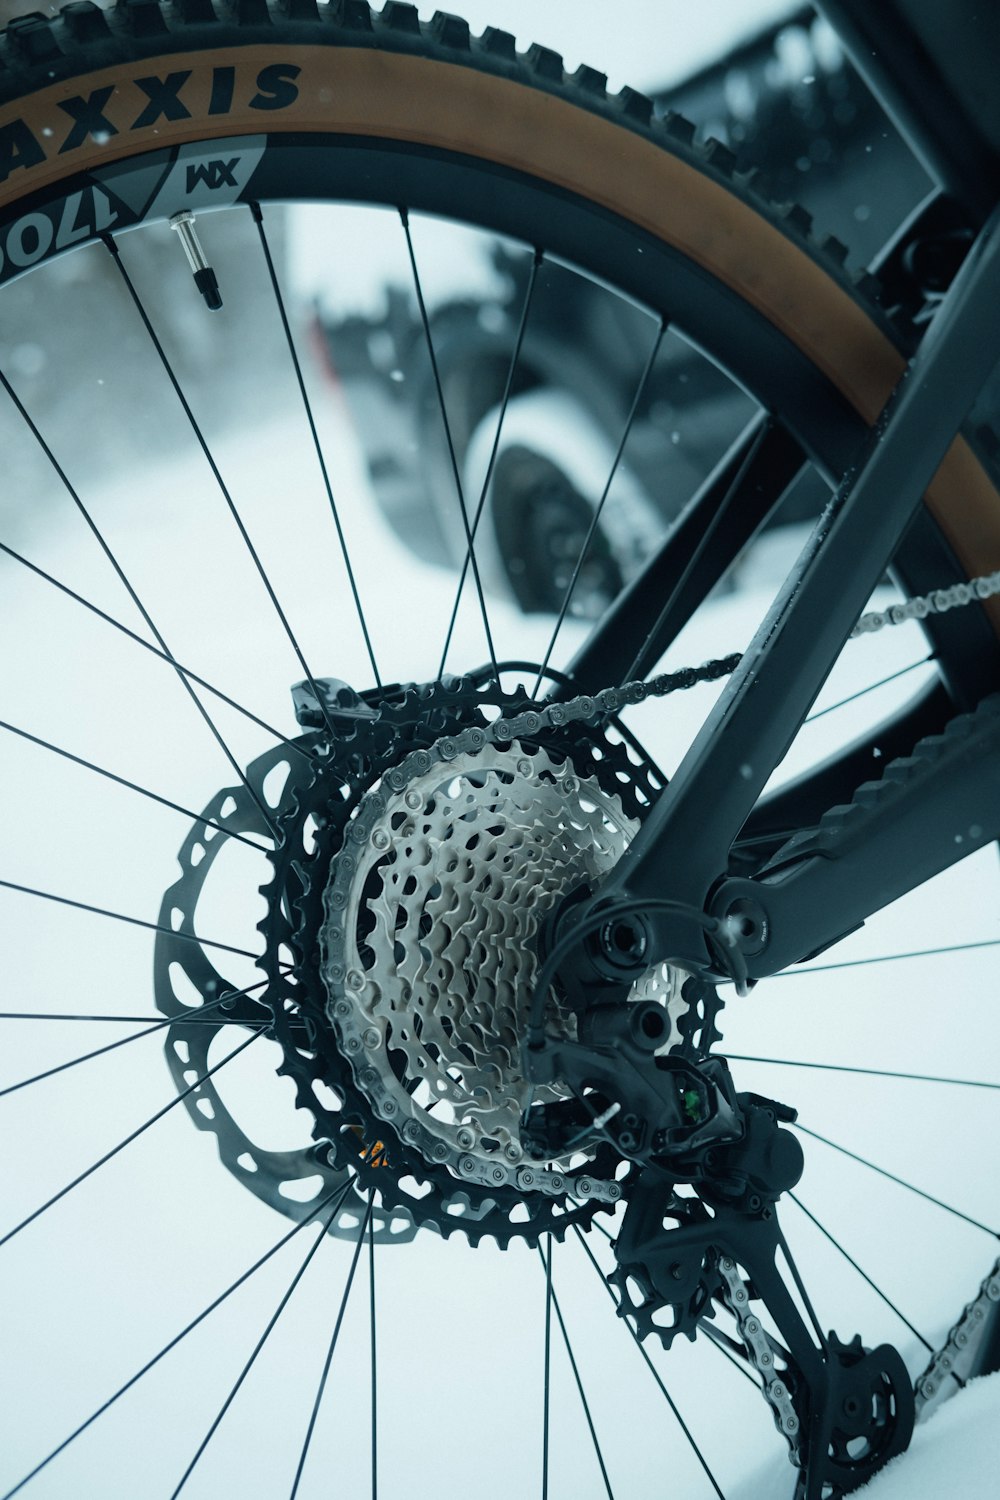 a close up of a bike tire on a snowy day